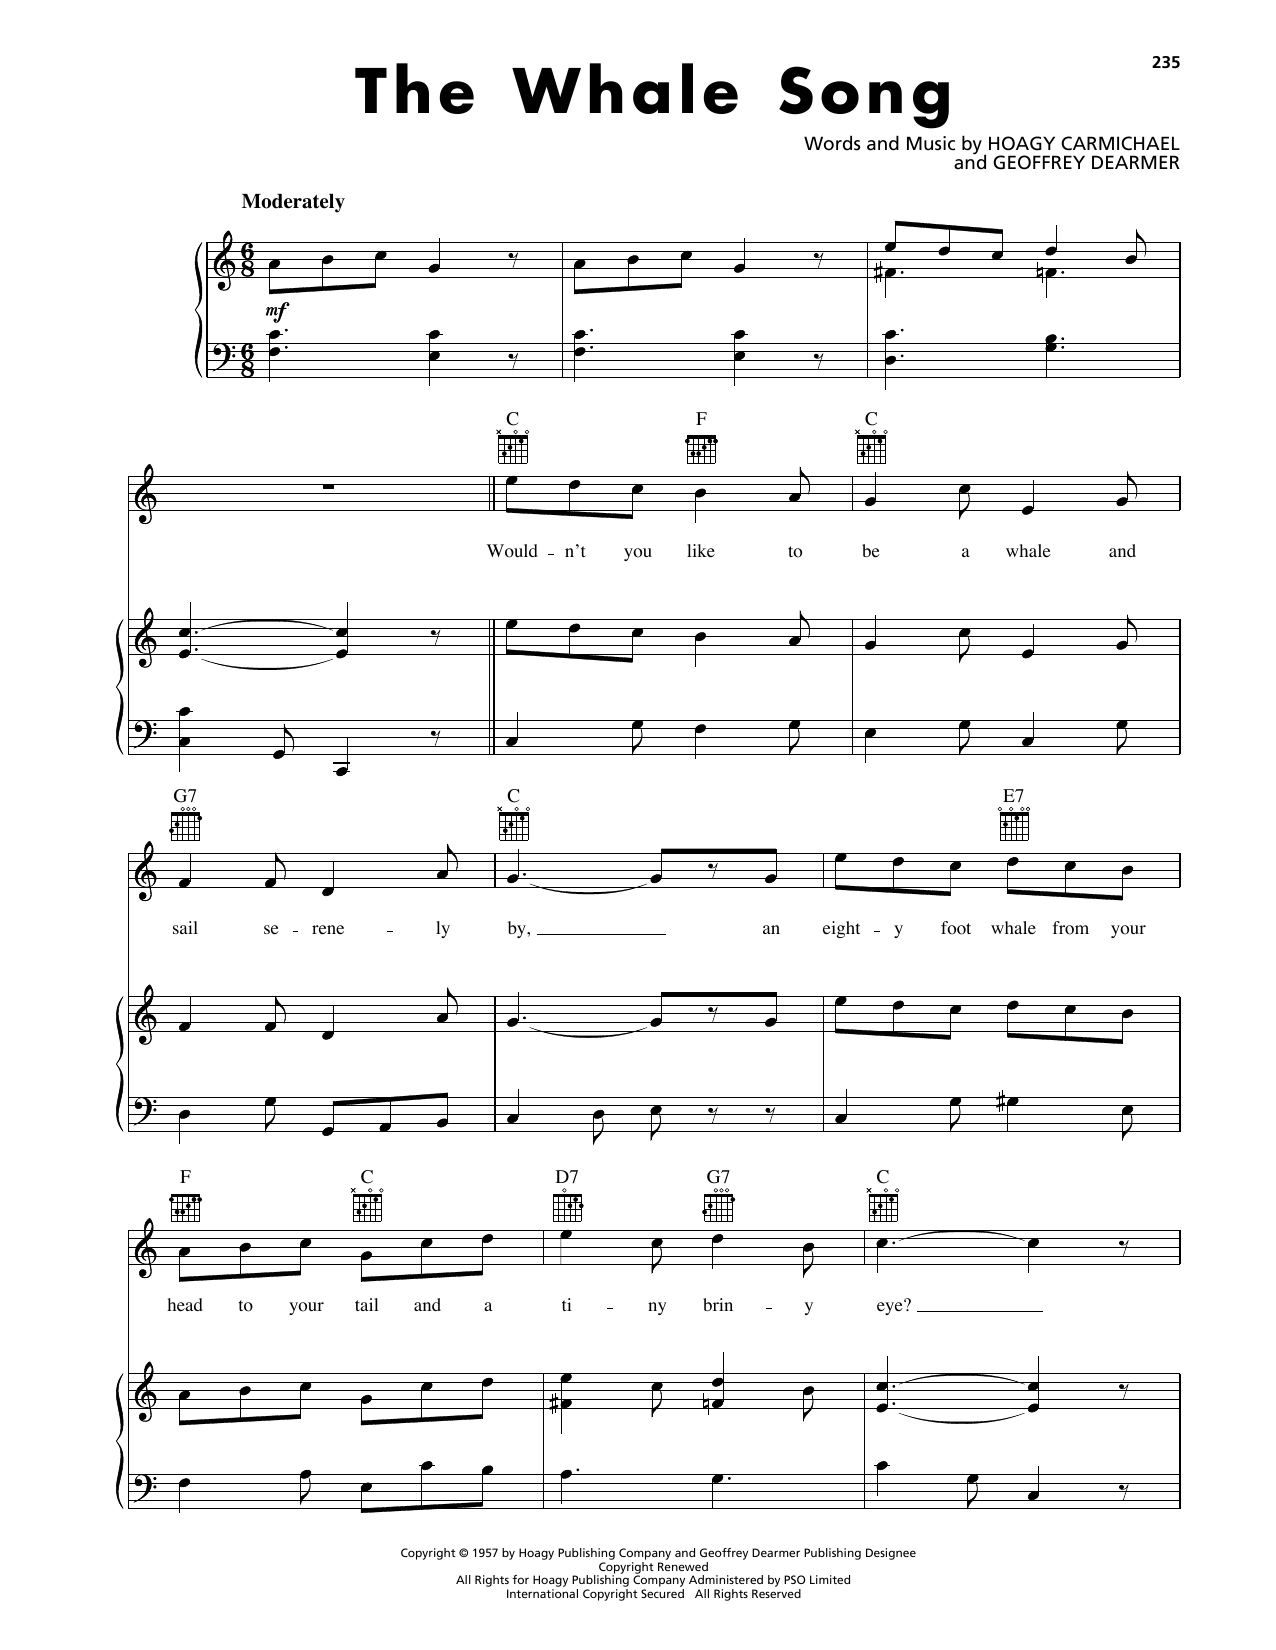 Download Hoagy Carmichael The Whale Song Sheet Music